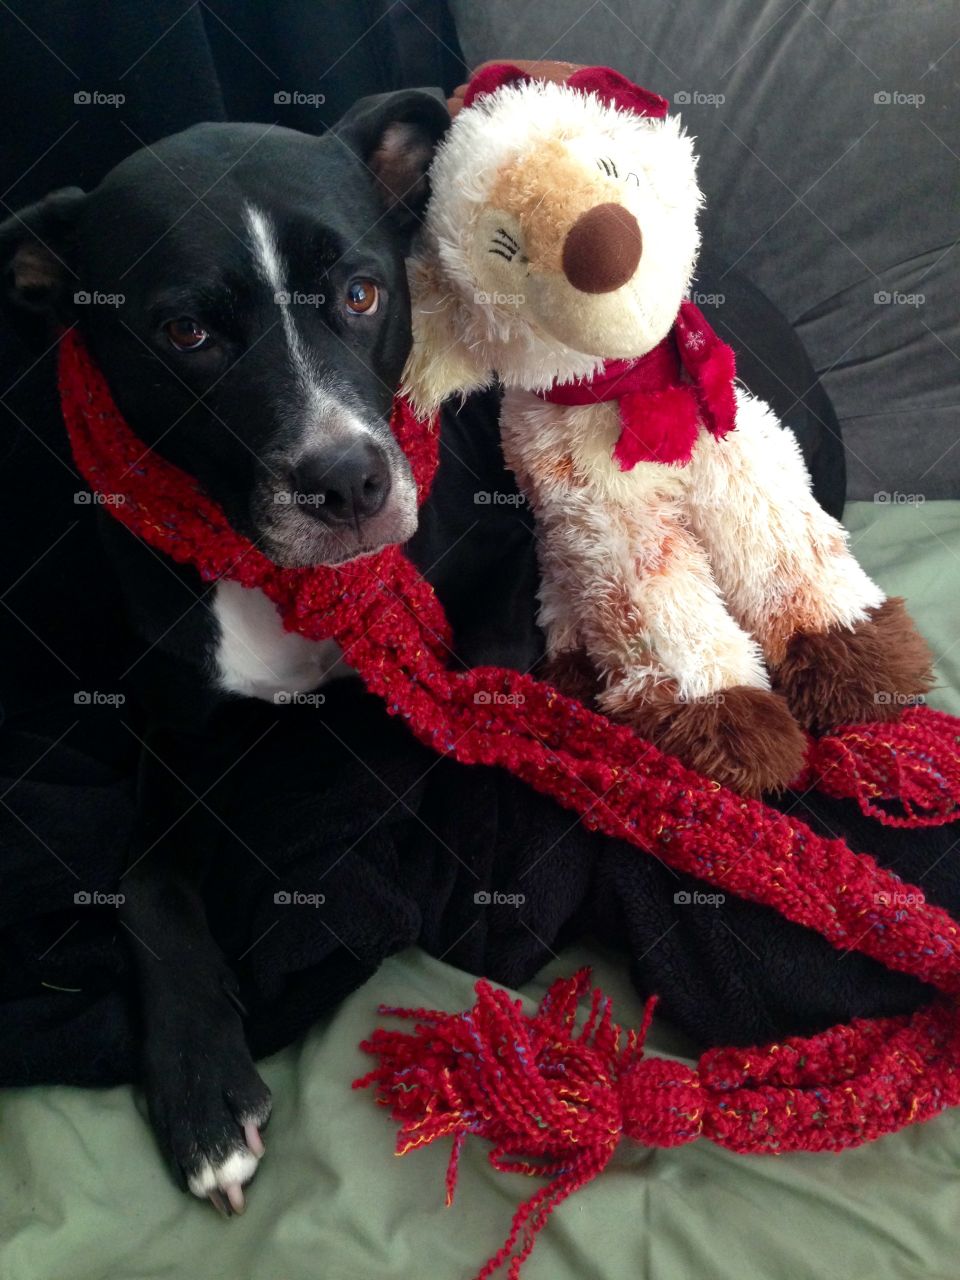 Happy Holidays . My moms dog, Luna, was cuddling with her reindeer when I decide to make a funny picture moment of it & added the scarf.